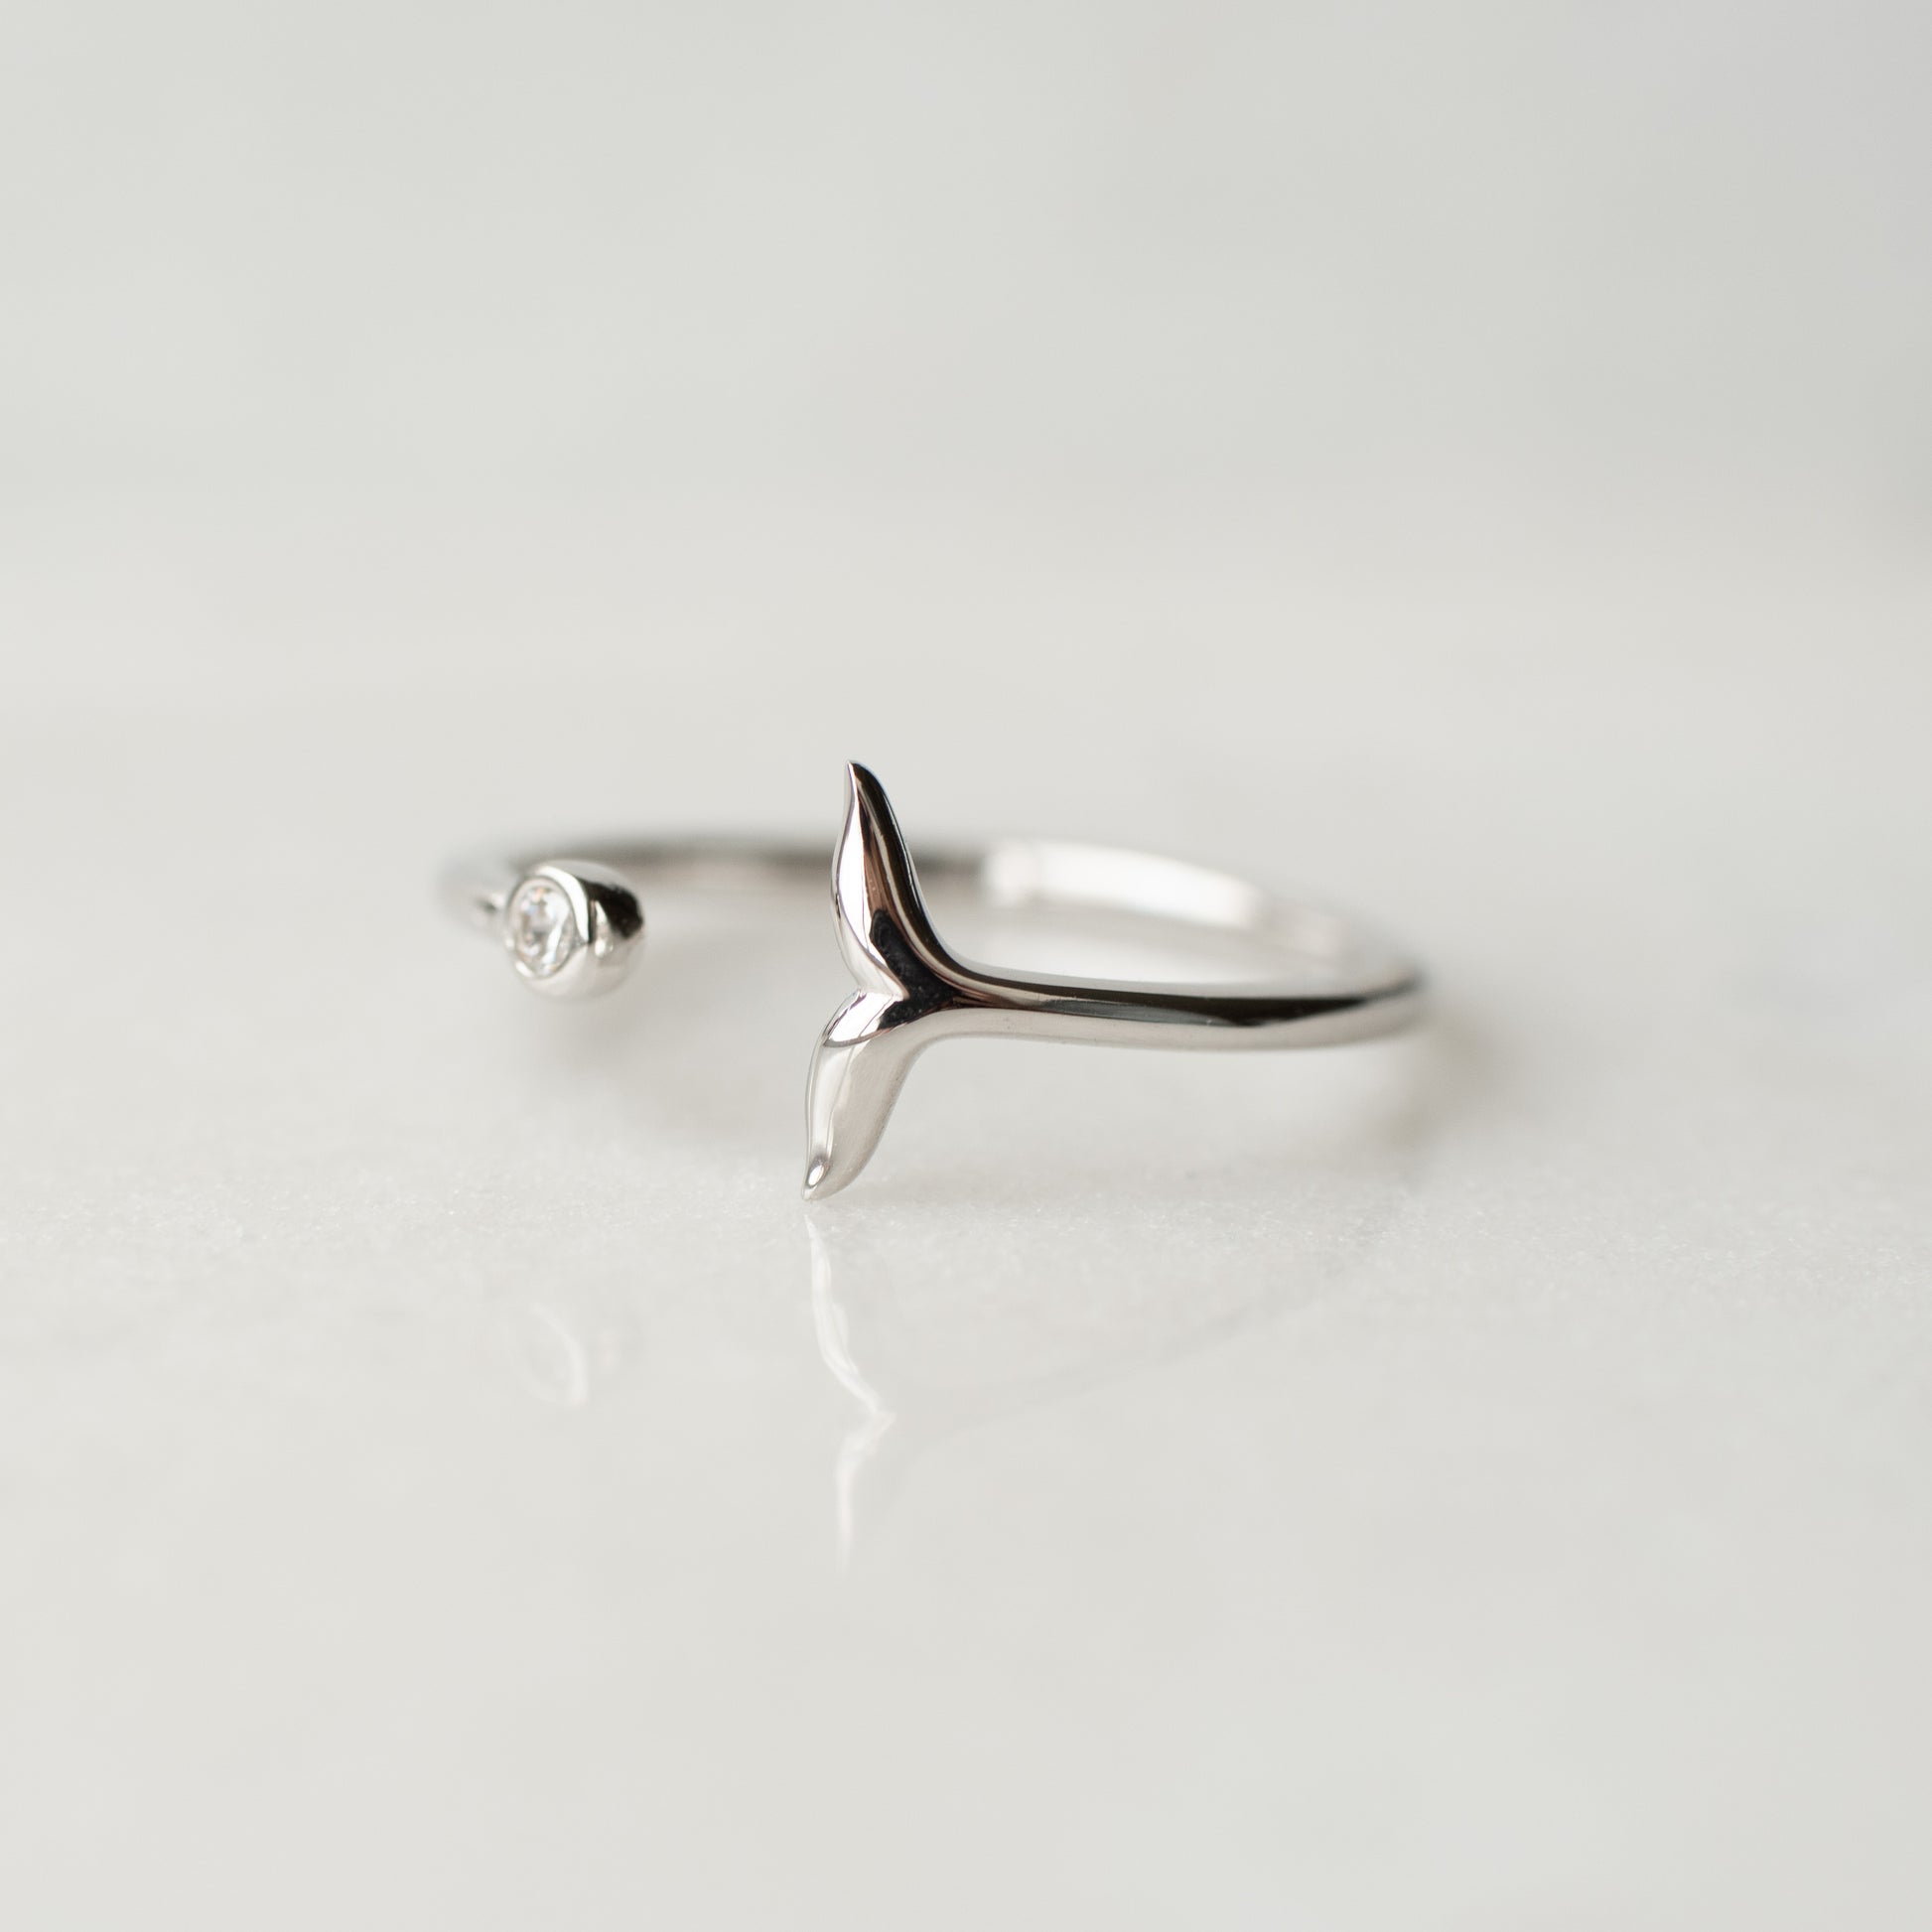 Dainty tail ring in 925 sterling silver